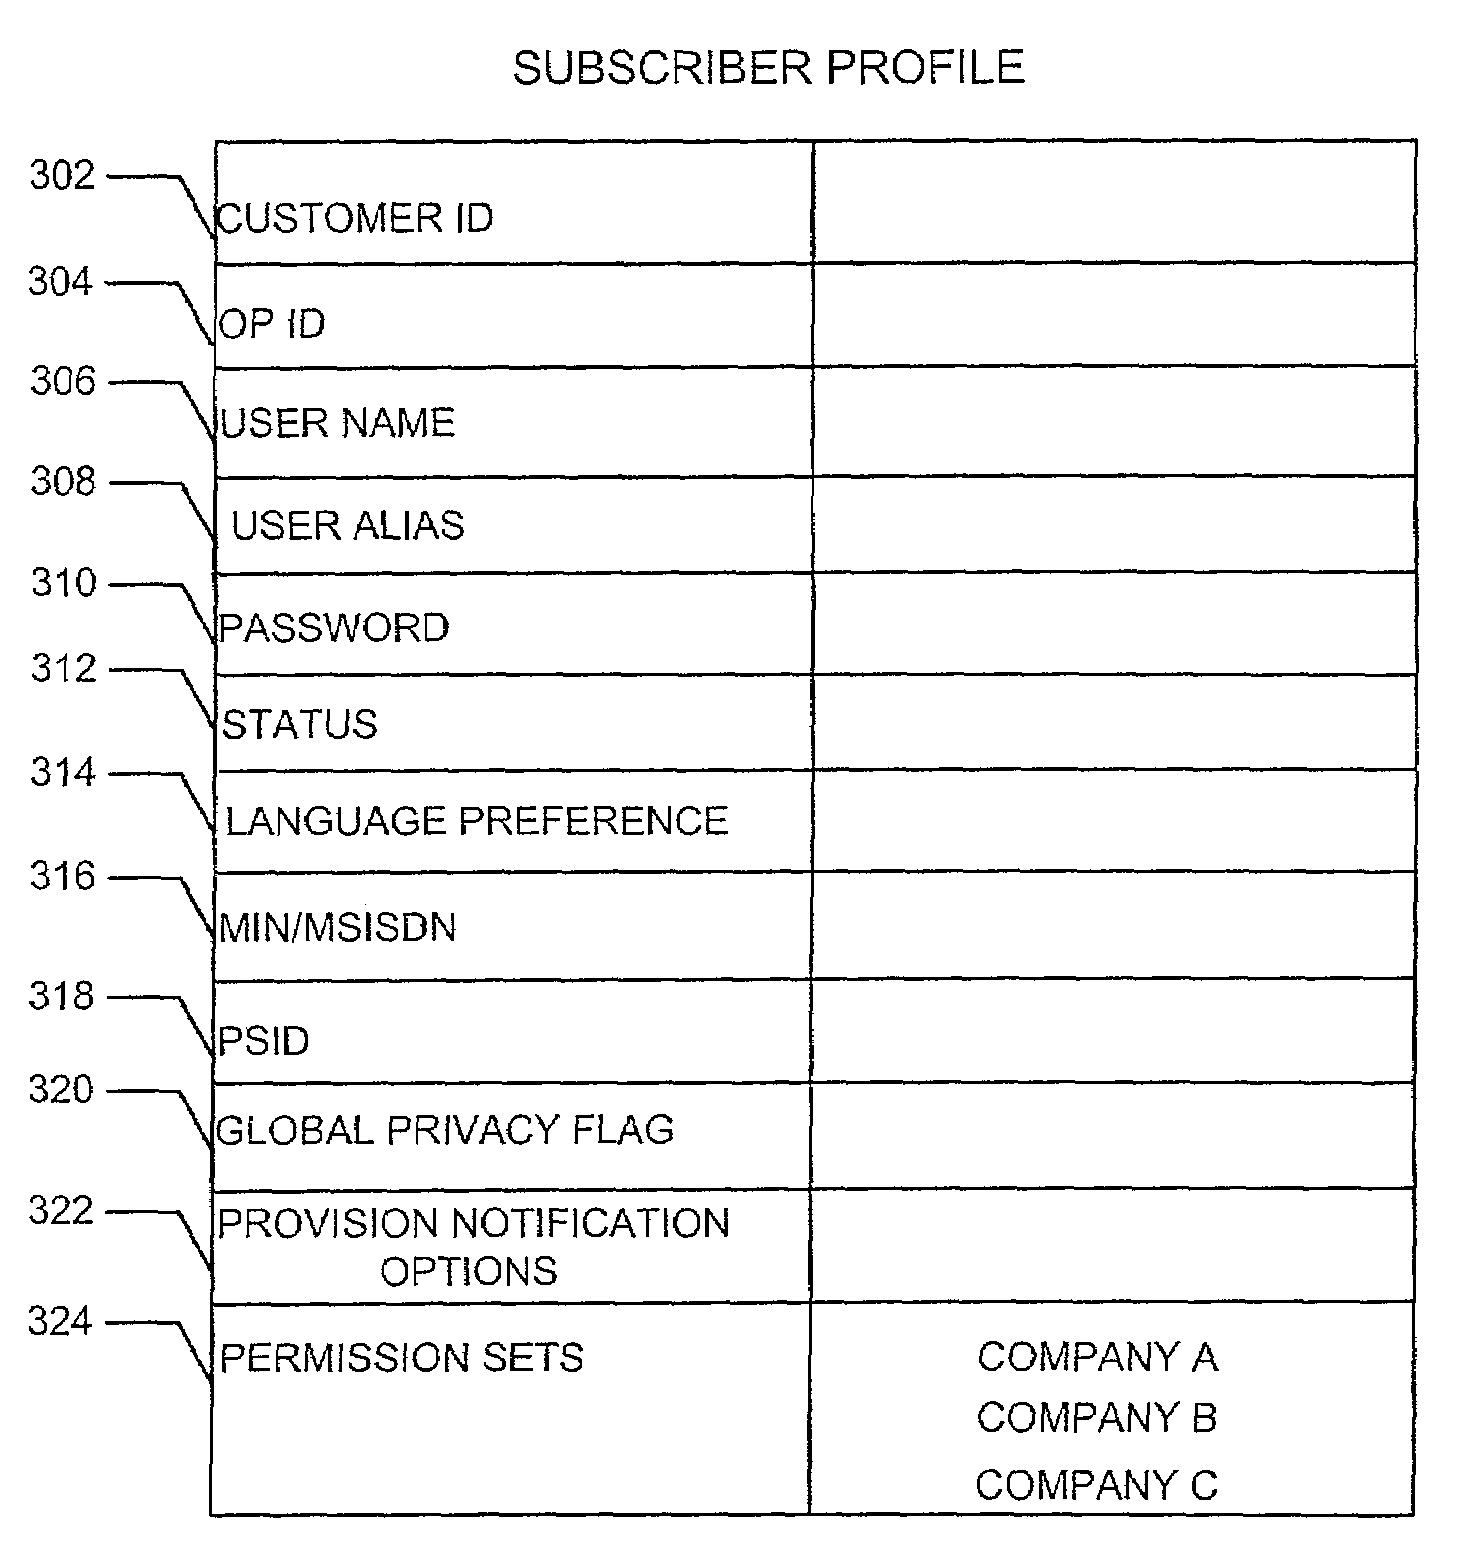 Method and system for managing location information for wireless communications devices